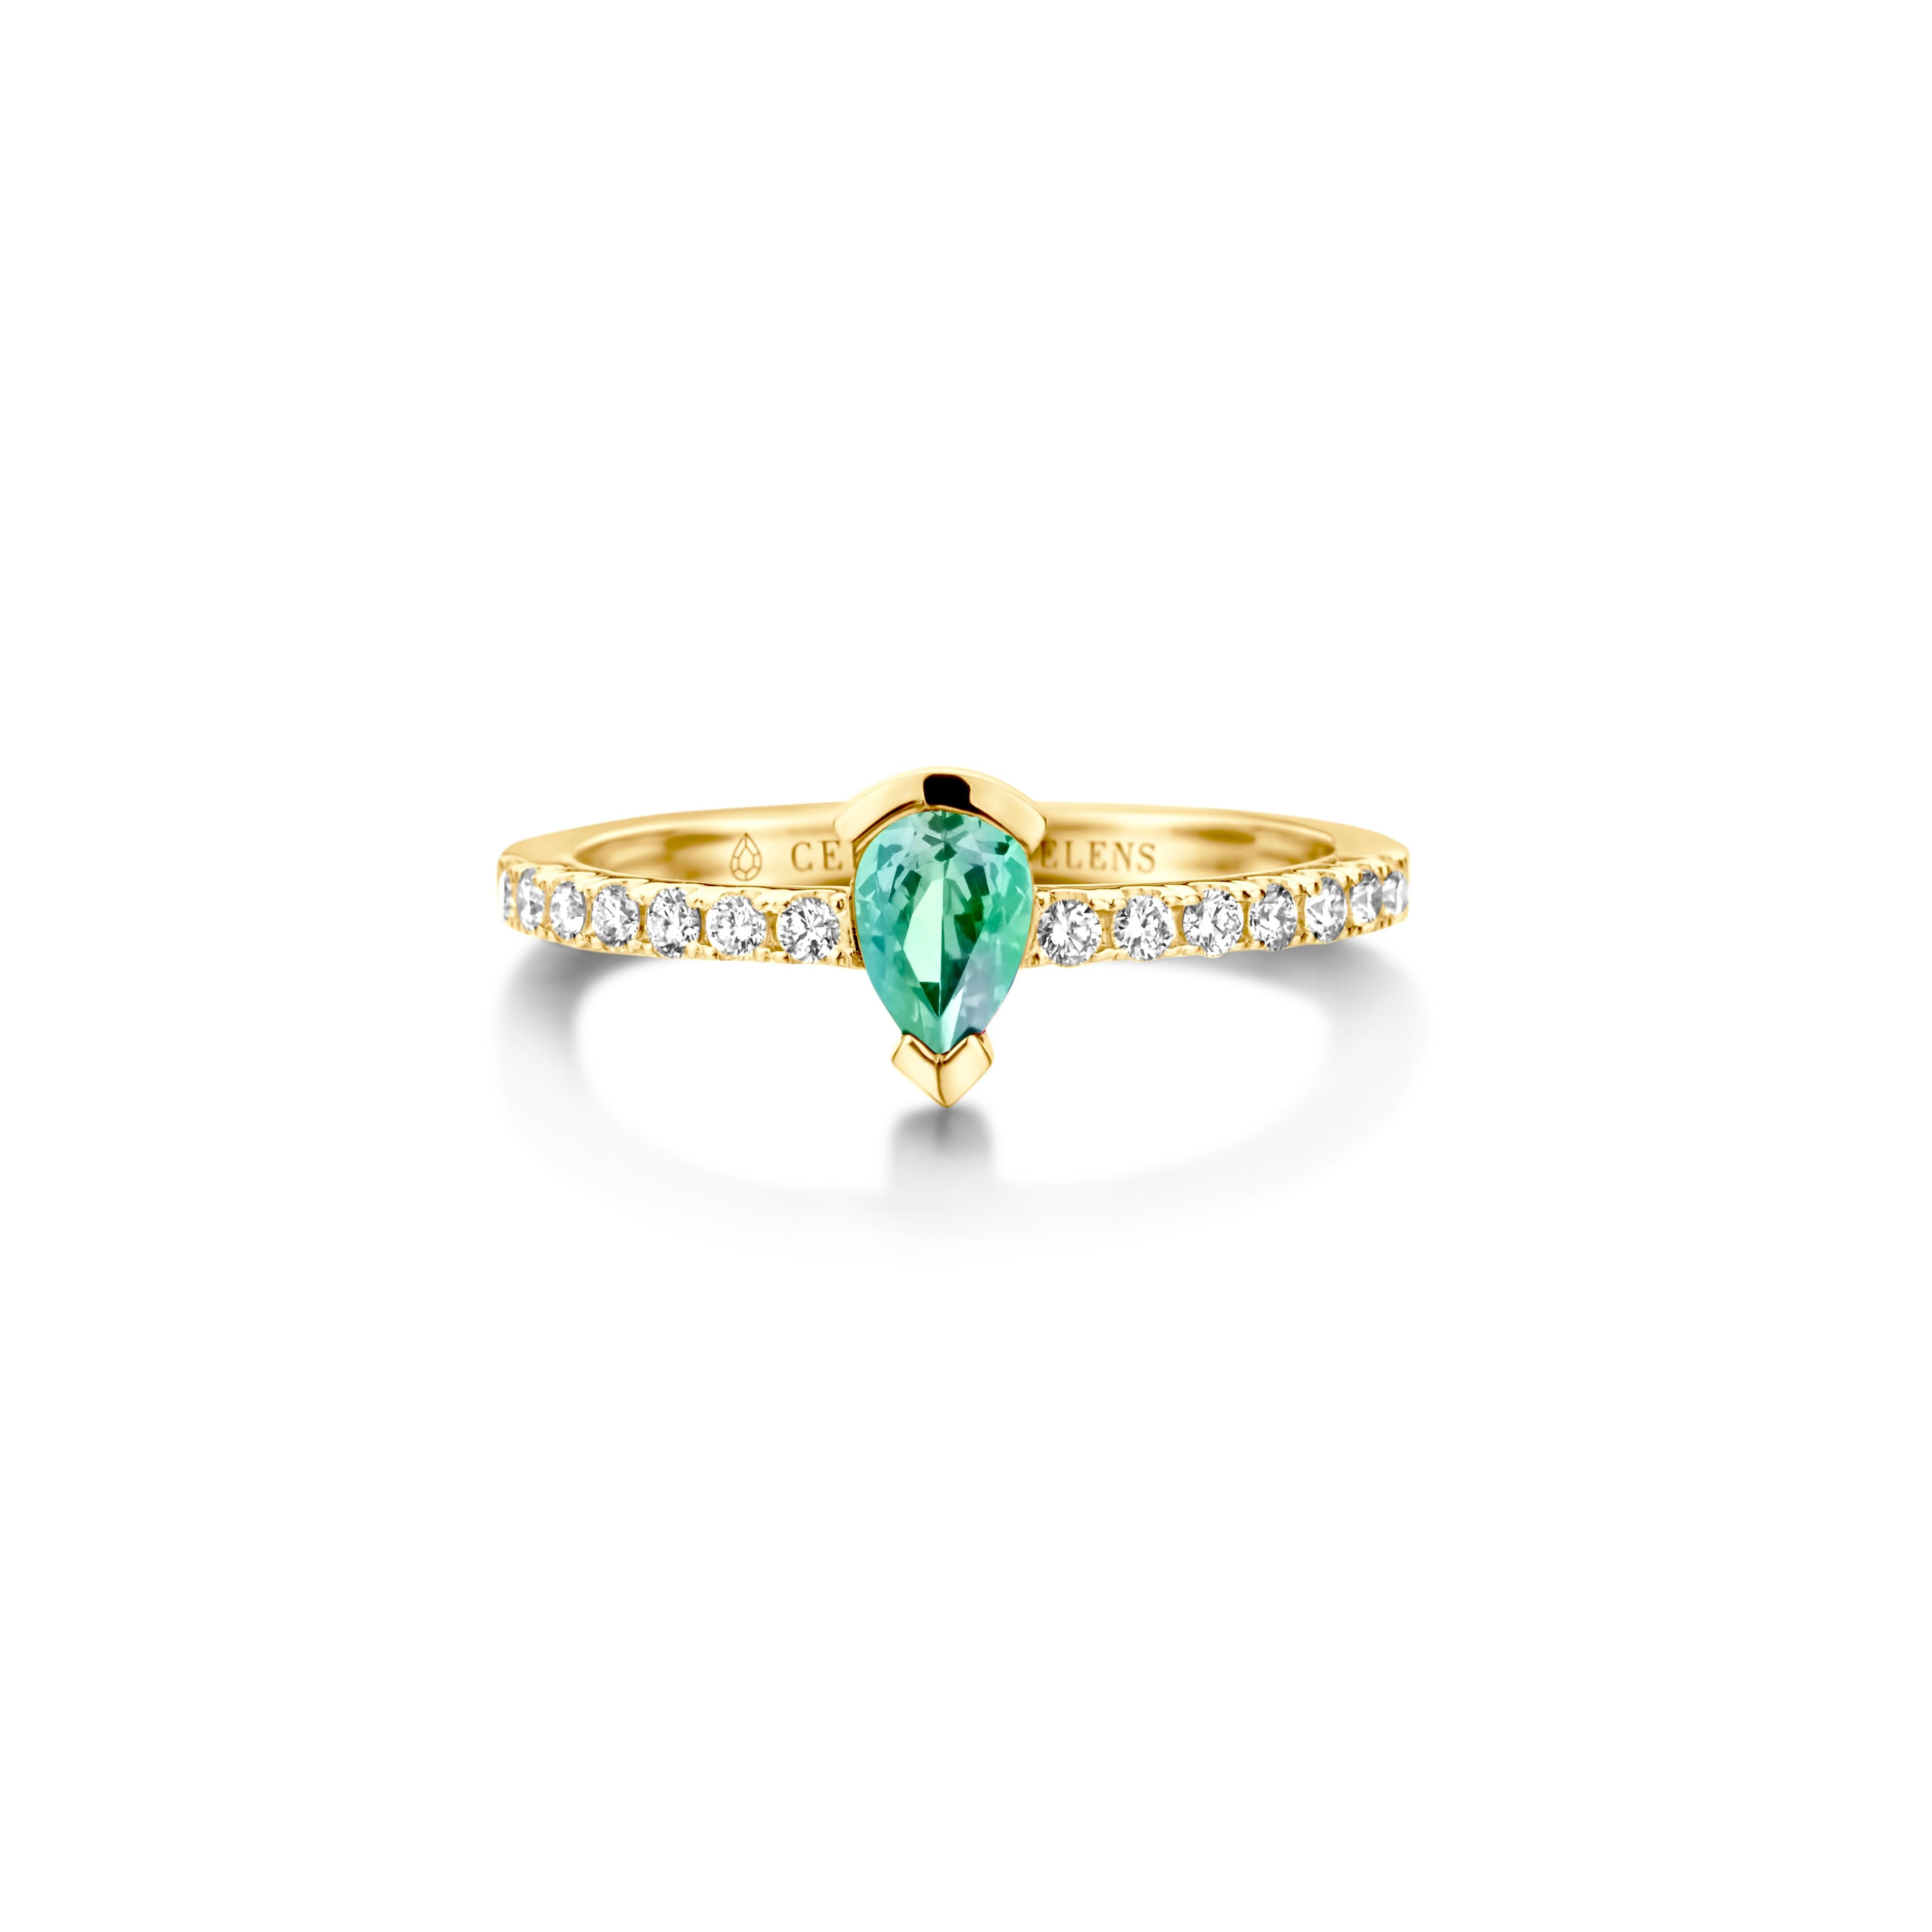 Adeline Straight ring in 18Kt rose gold set with a pear-shaped Mint Tourmaline and 0,24 Ct of white brilliant cut diamonds - VS F quality. Also, available in yellow gold and white gold. Celine Roelens, a goldsmith and gemologist, is specialized in